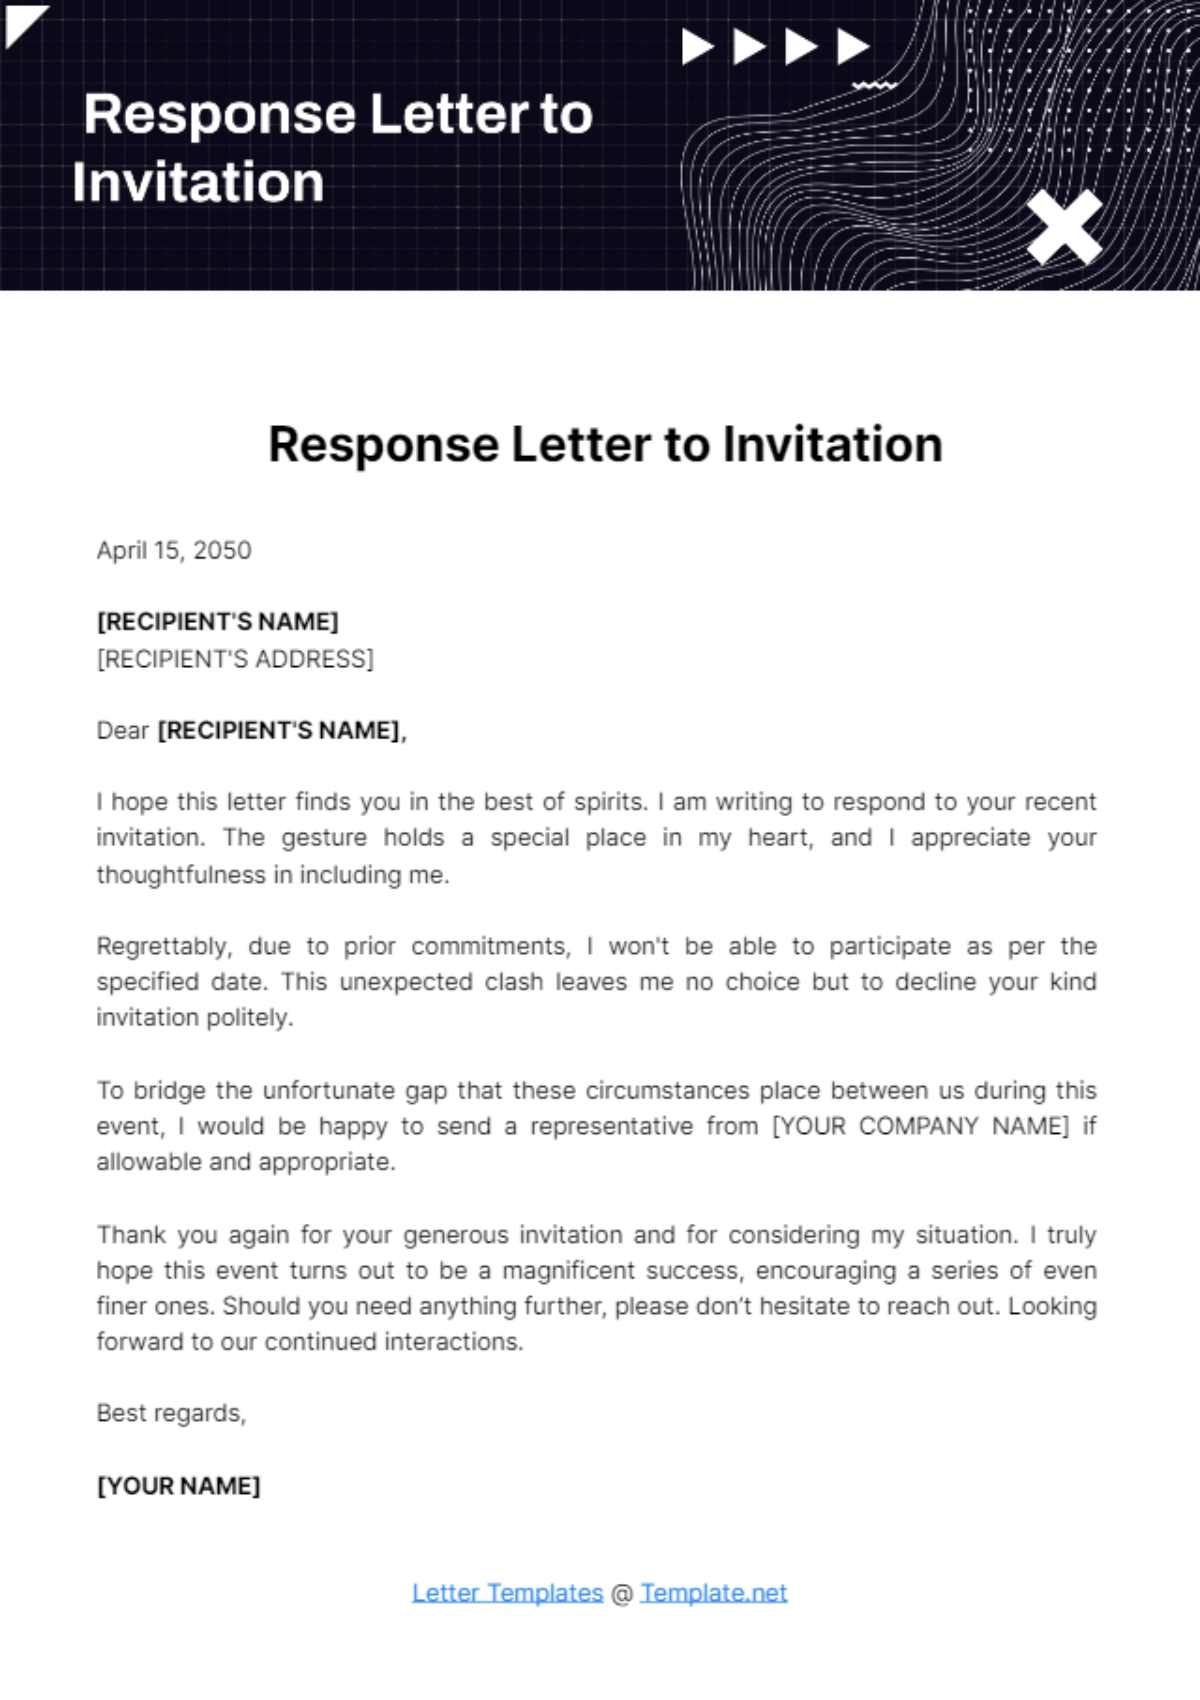 Free Response Letter to Invitation Template